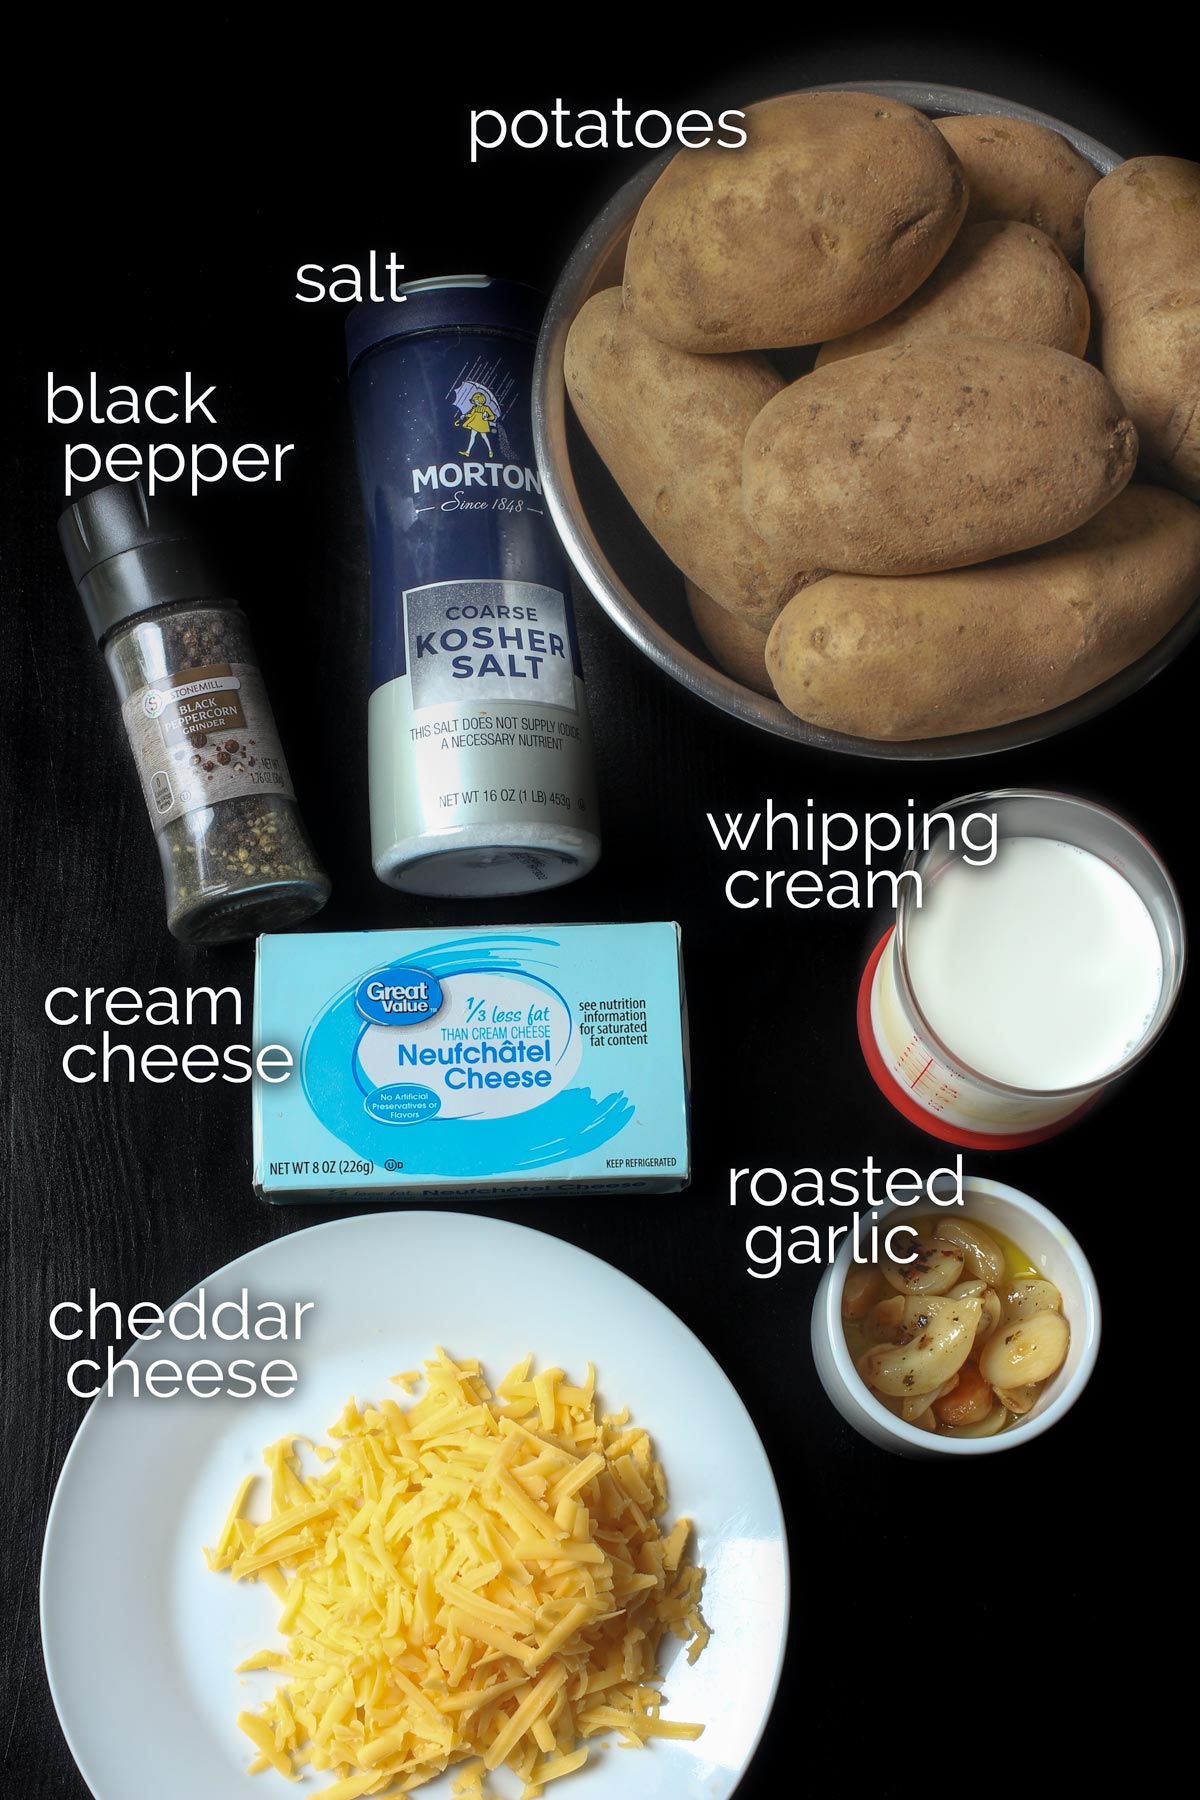 ingredients for mashed potato casserole laid out on a black work surface.